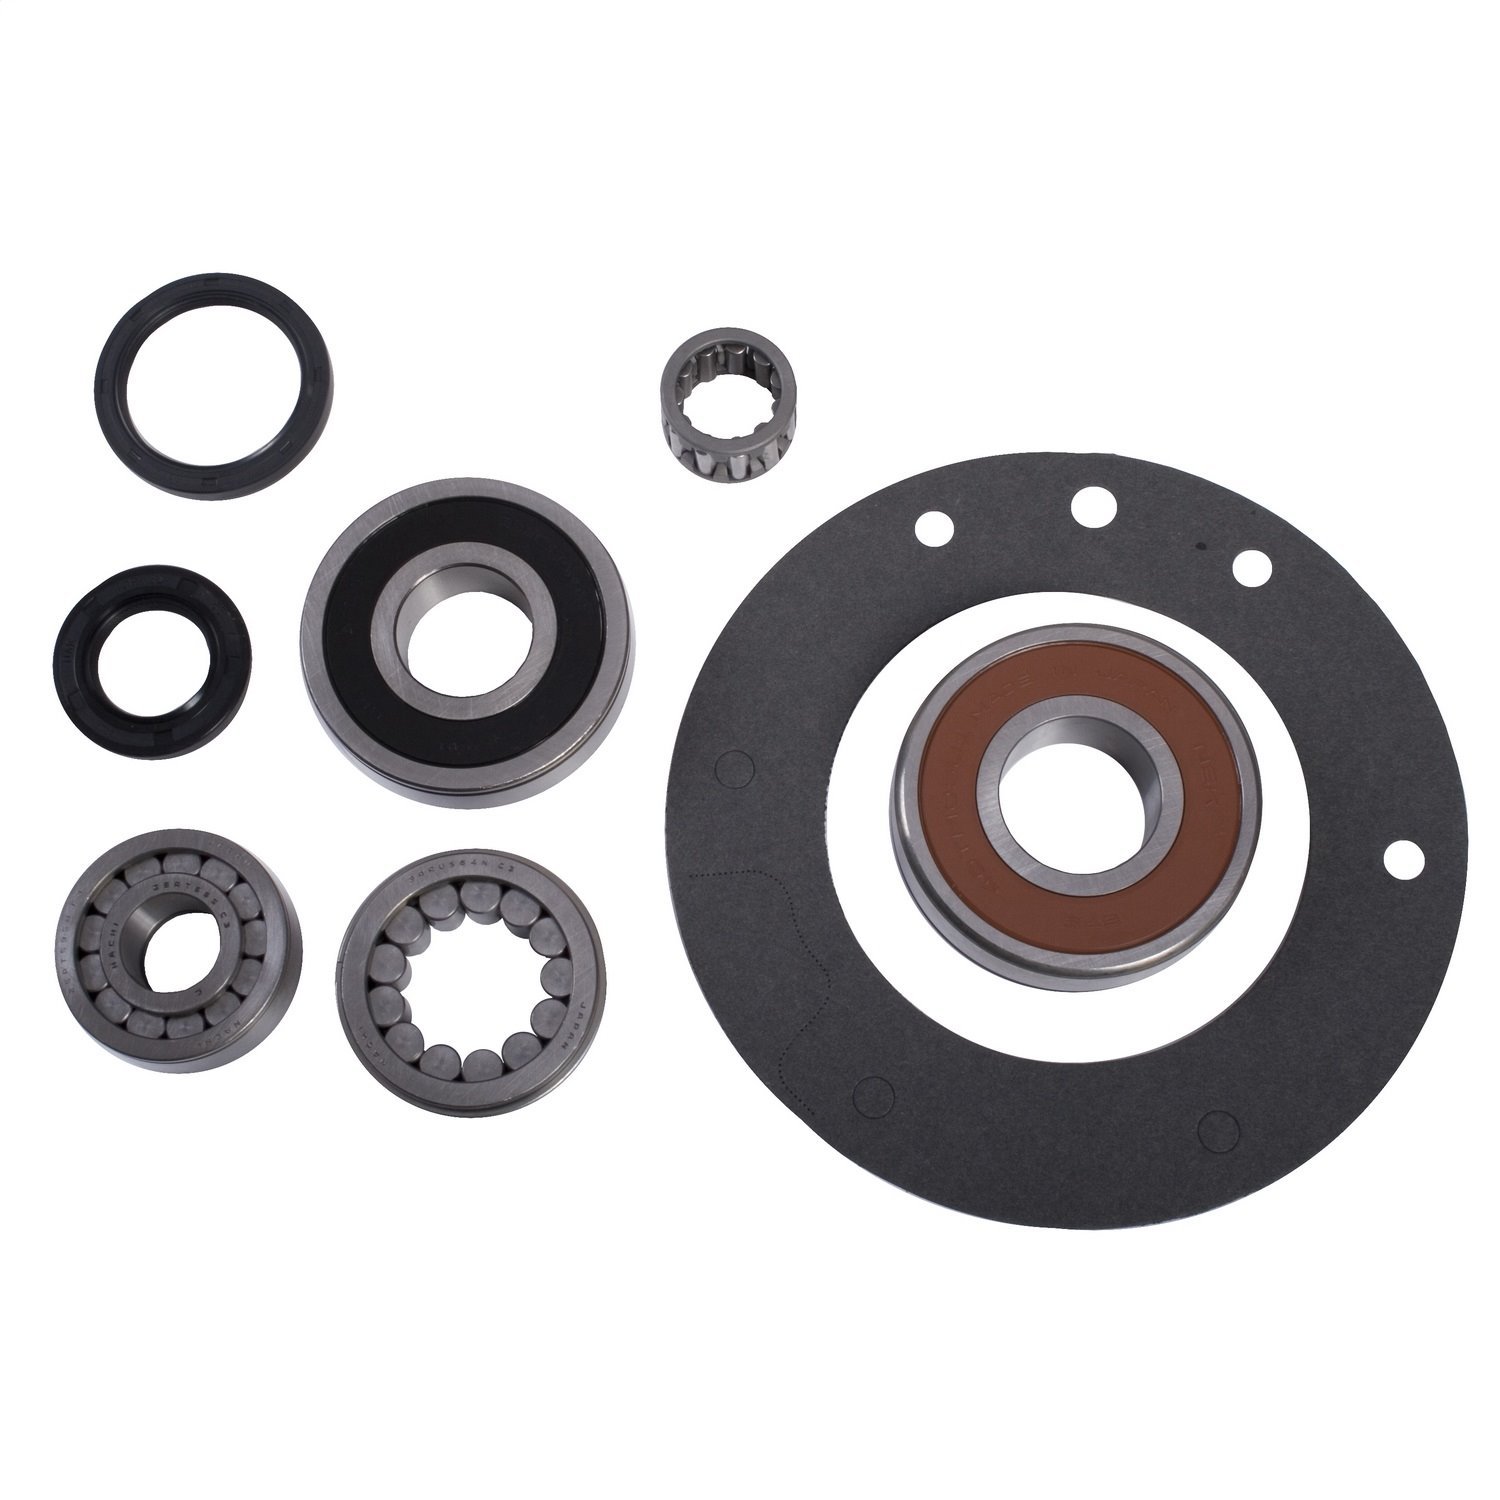 This transmission Overhaul kit from Omix-ADA fits the Aisin AX15 transmission found in 89-95 Jeep Wr